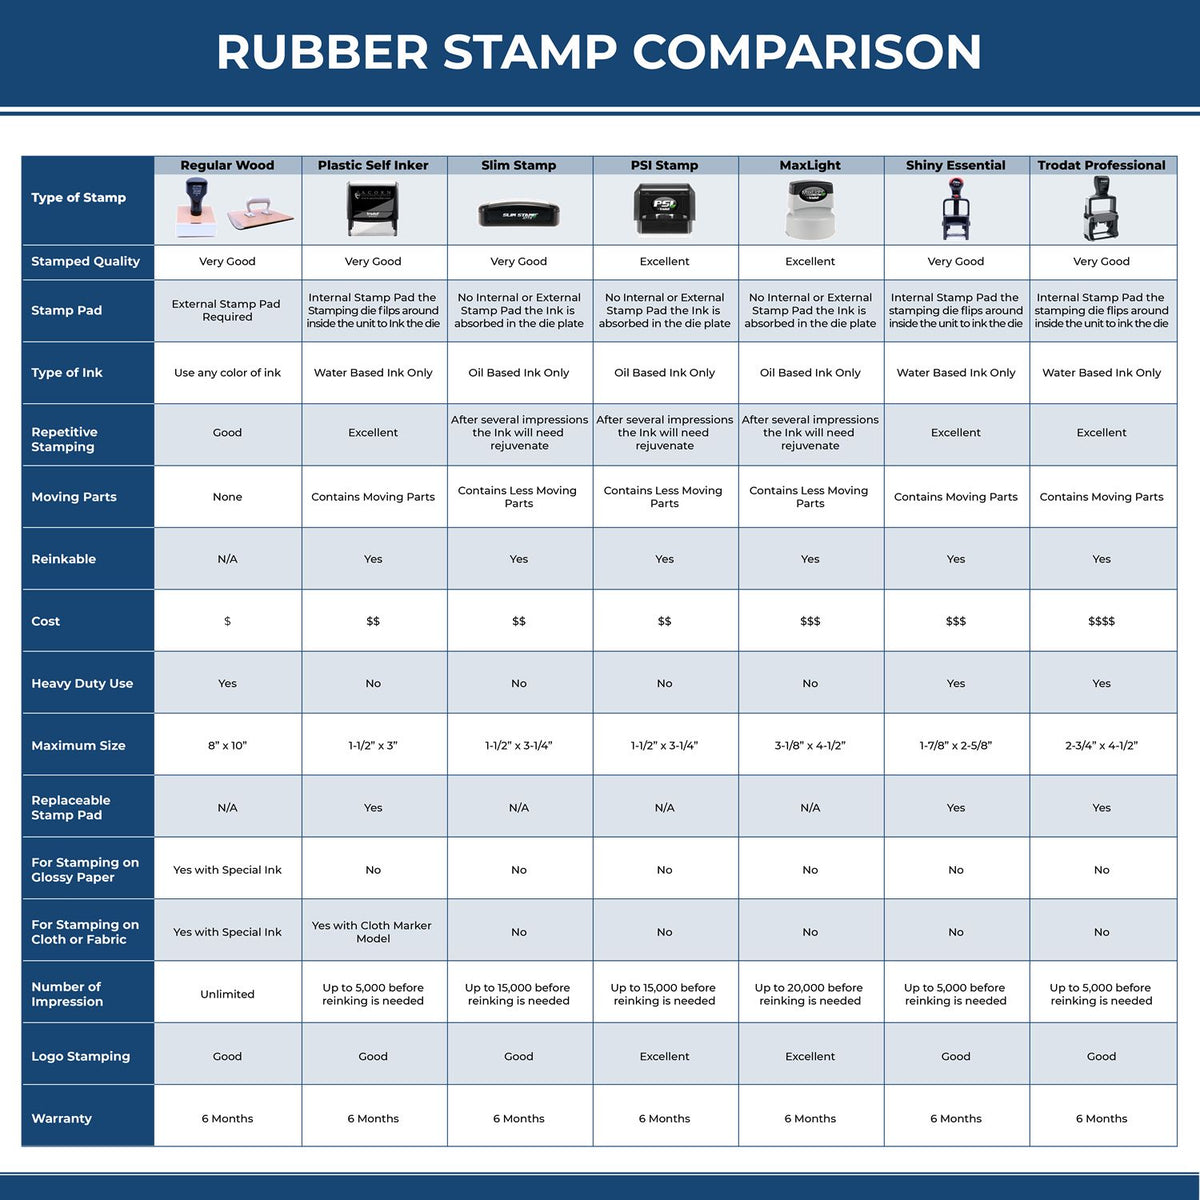 Faxed on Rubber Stamp 4093R Rubber Stamp Comparison